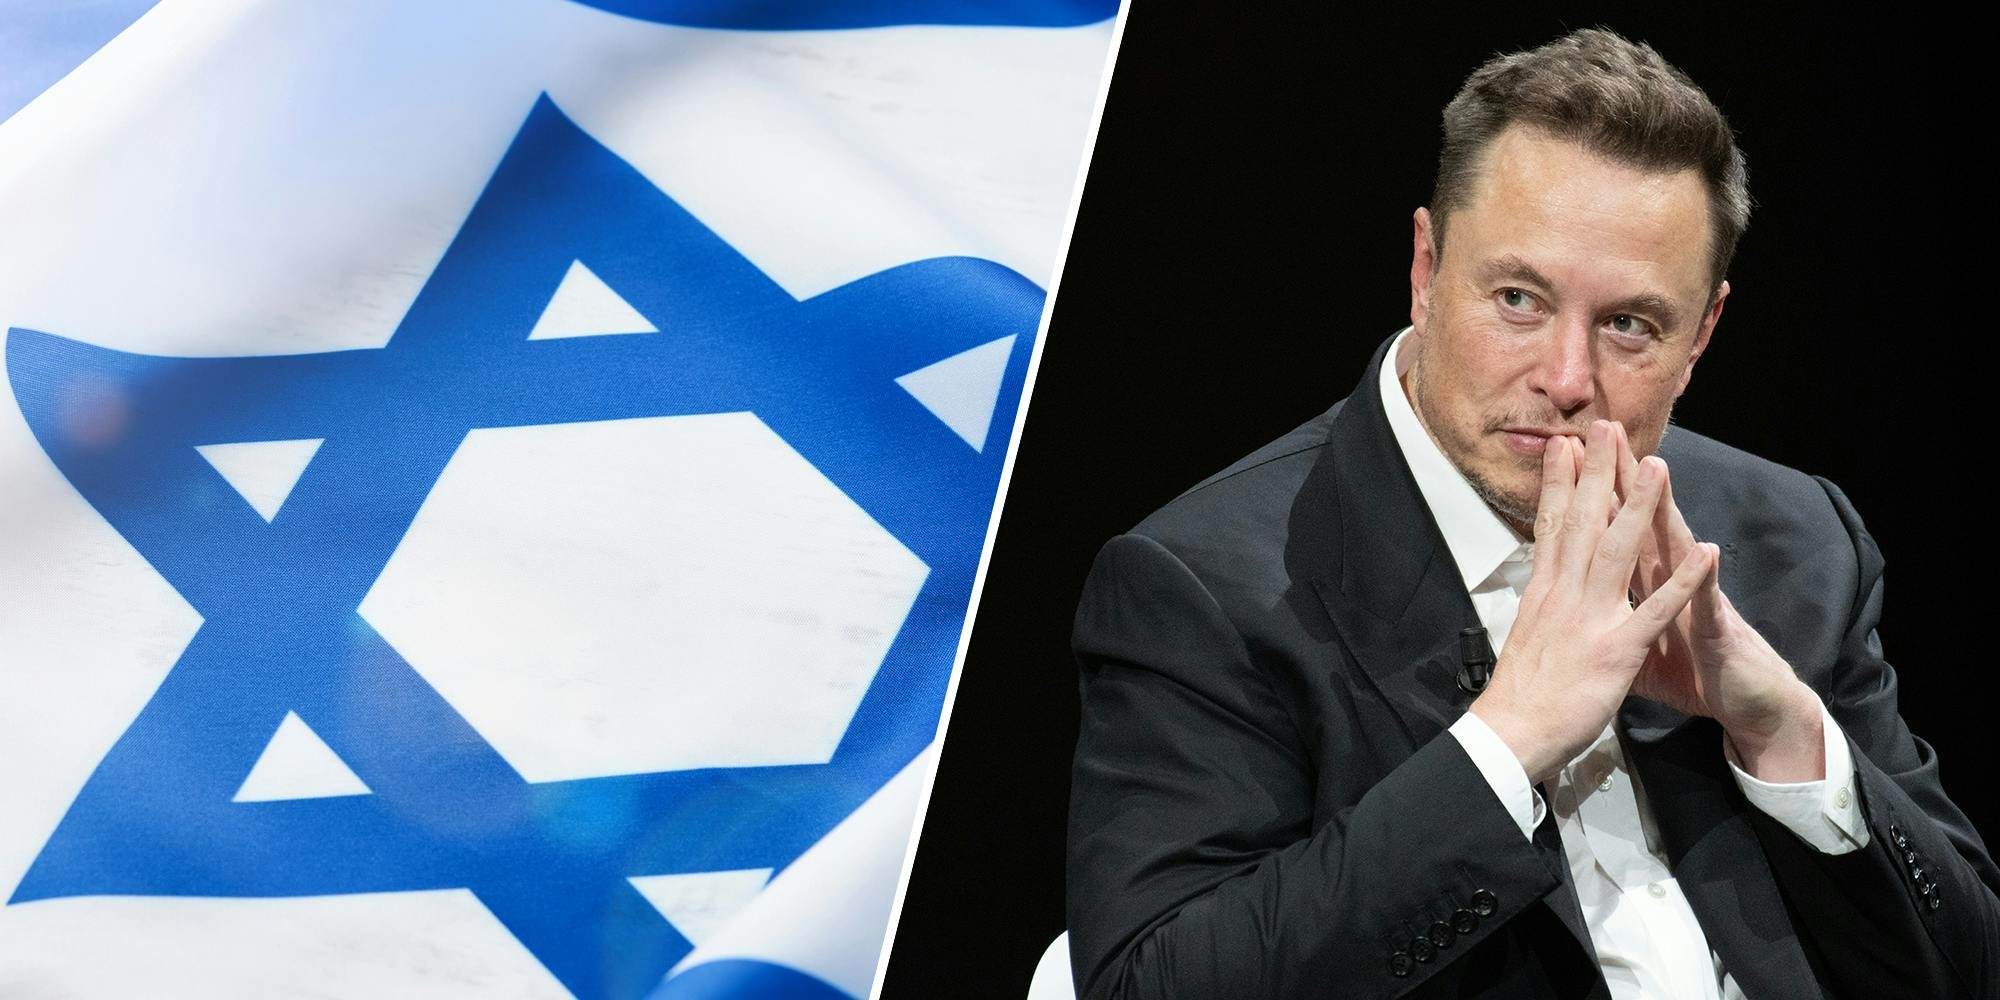 Musk's visit to Israel blasted as PR stunt: 'Just days ago endorsed a virulently antisemitic trope'